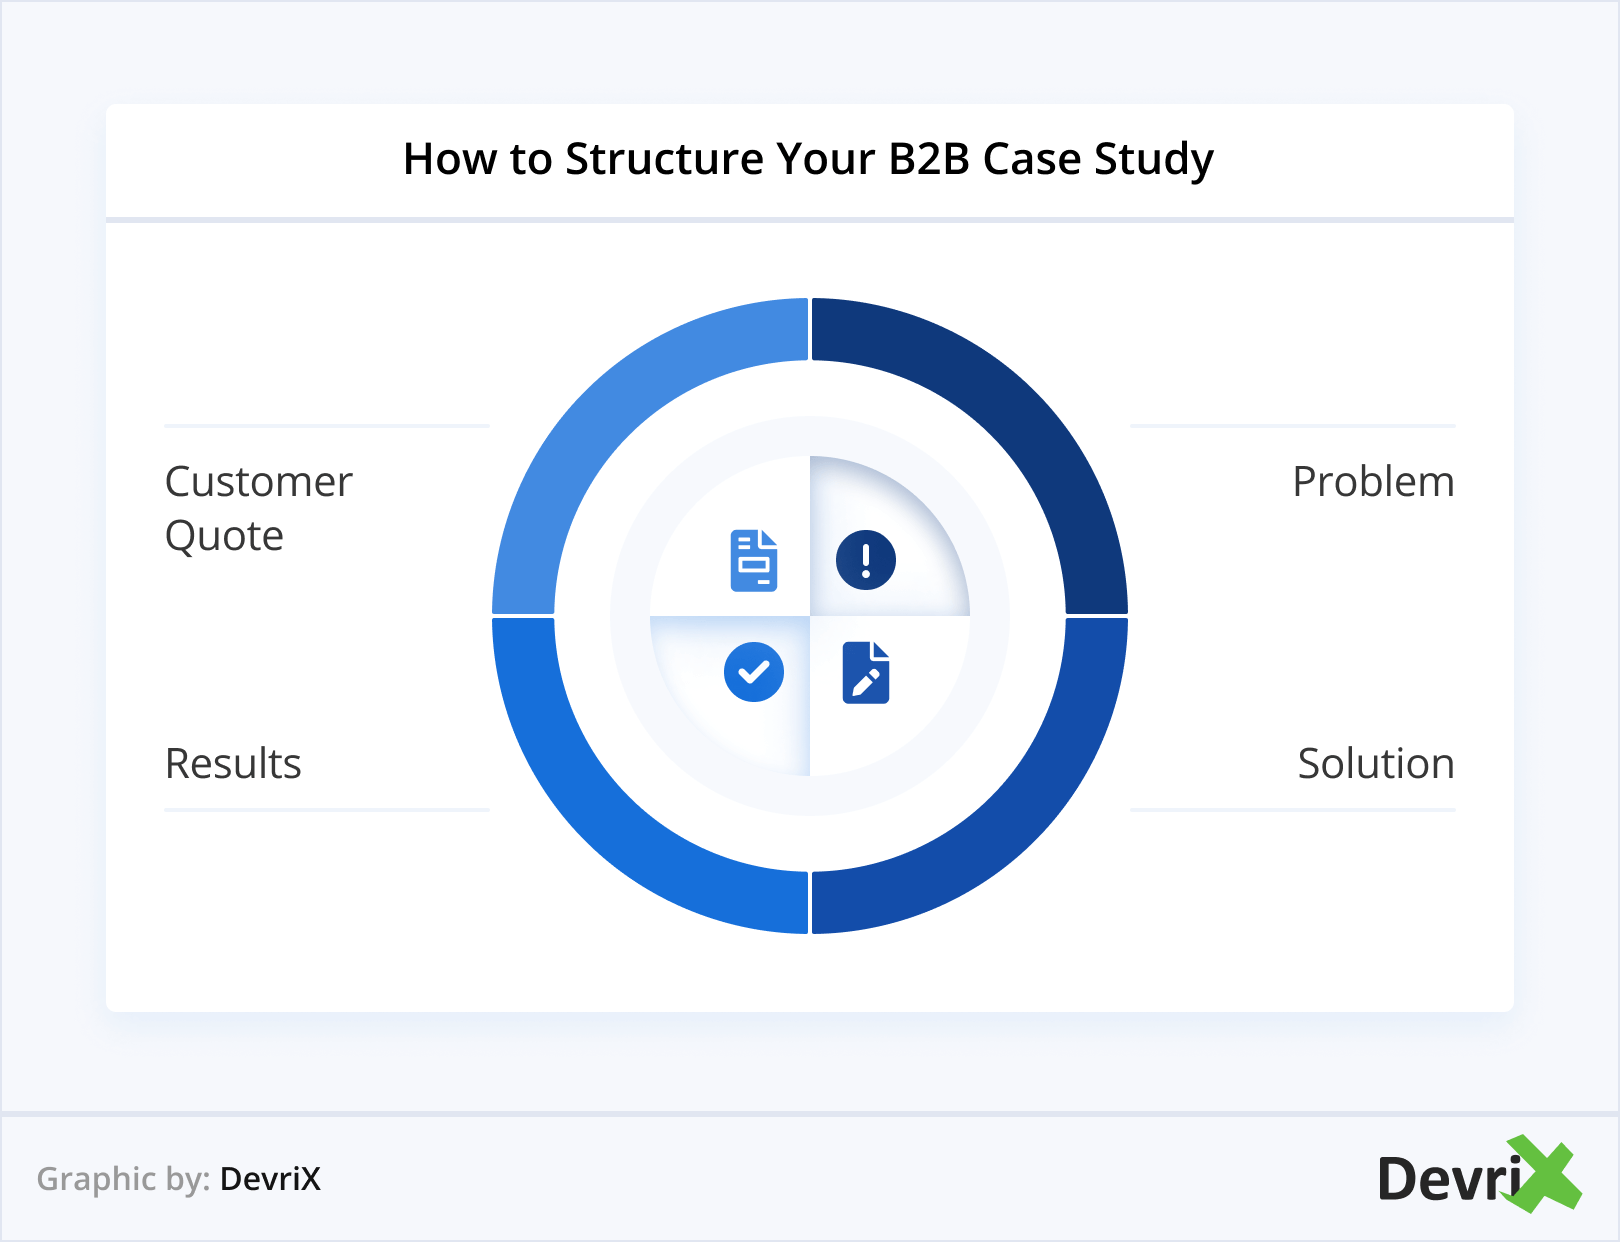 How to Structure Your B2B Case Study